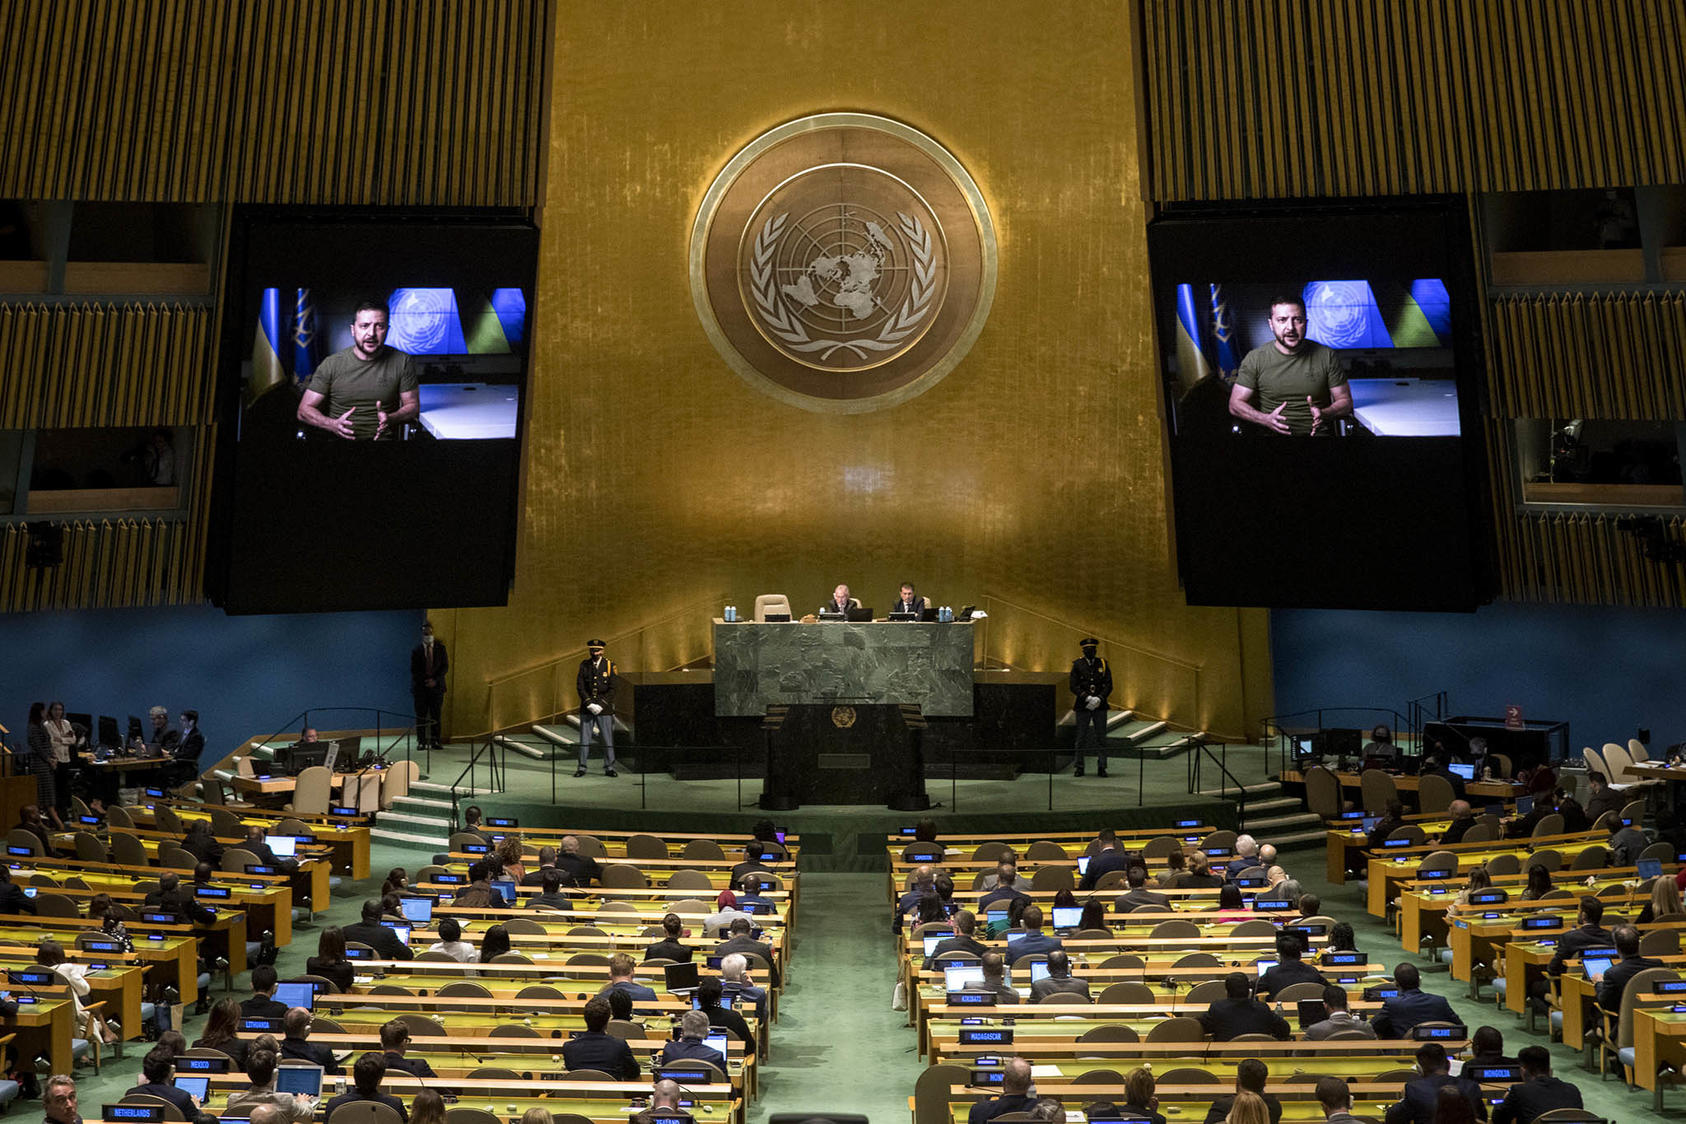 President Volodymyr Zelenskyy of Ukraine offers remarks at the U.N. General Assembly, Sept. 21, 2022. He said that Russia should be stripped of its veto power on the Security Council after its crimes against his country. (Dave Sanders/The New York Times)